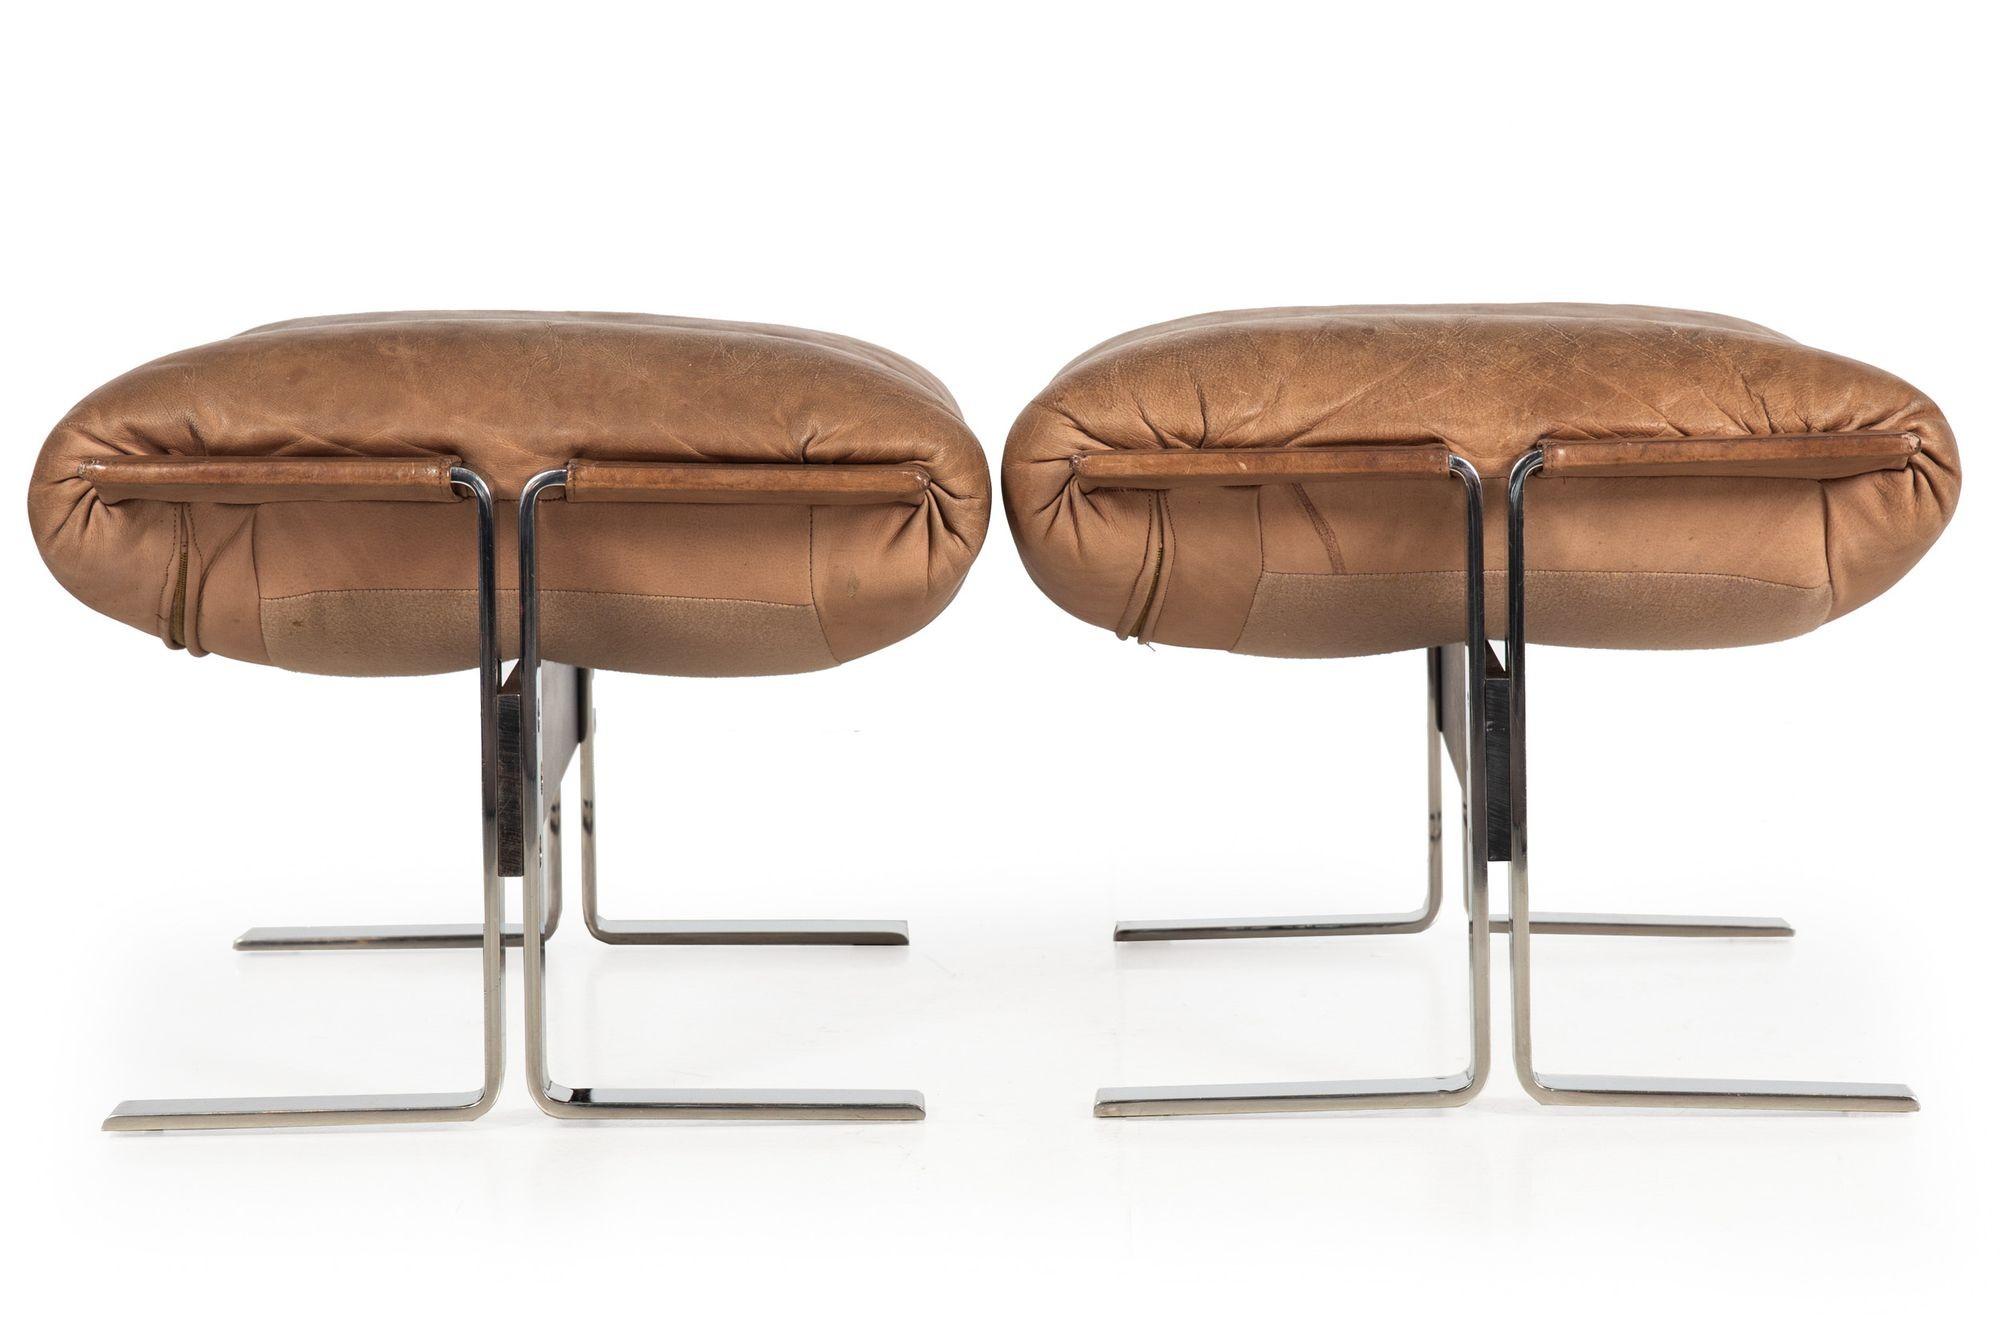 20th Century Pair of Chrome and Leather Lounge Chairs with Ottomans by Richard Hersberger For Sale